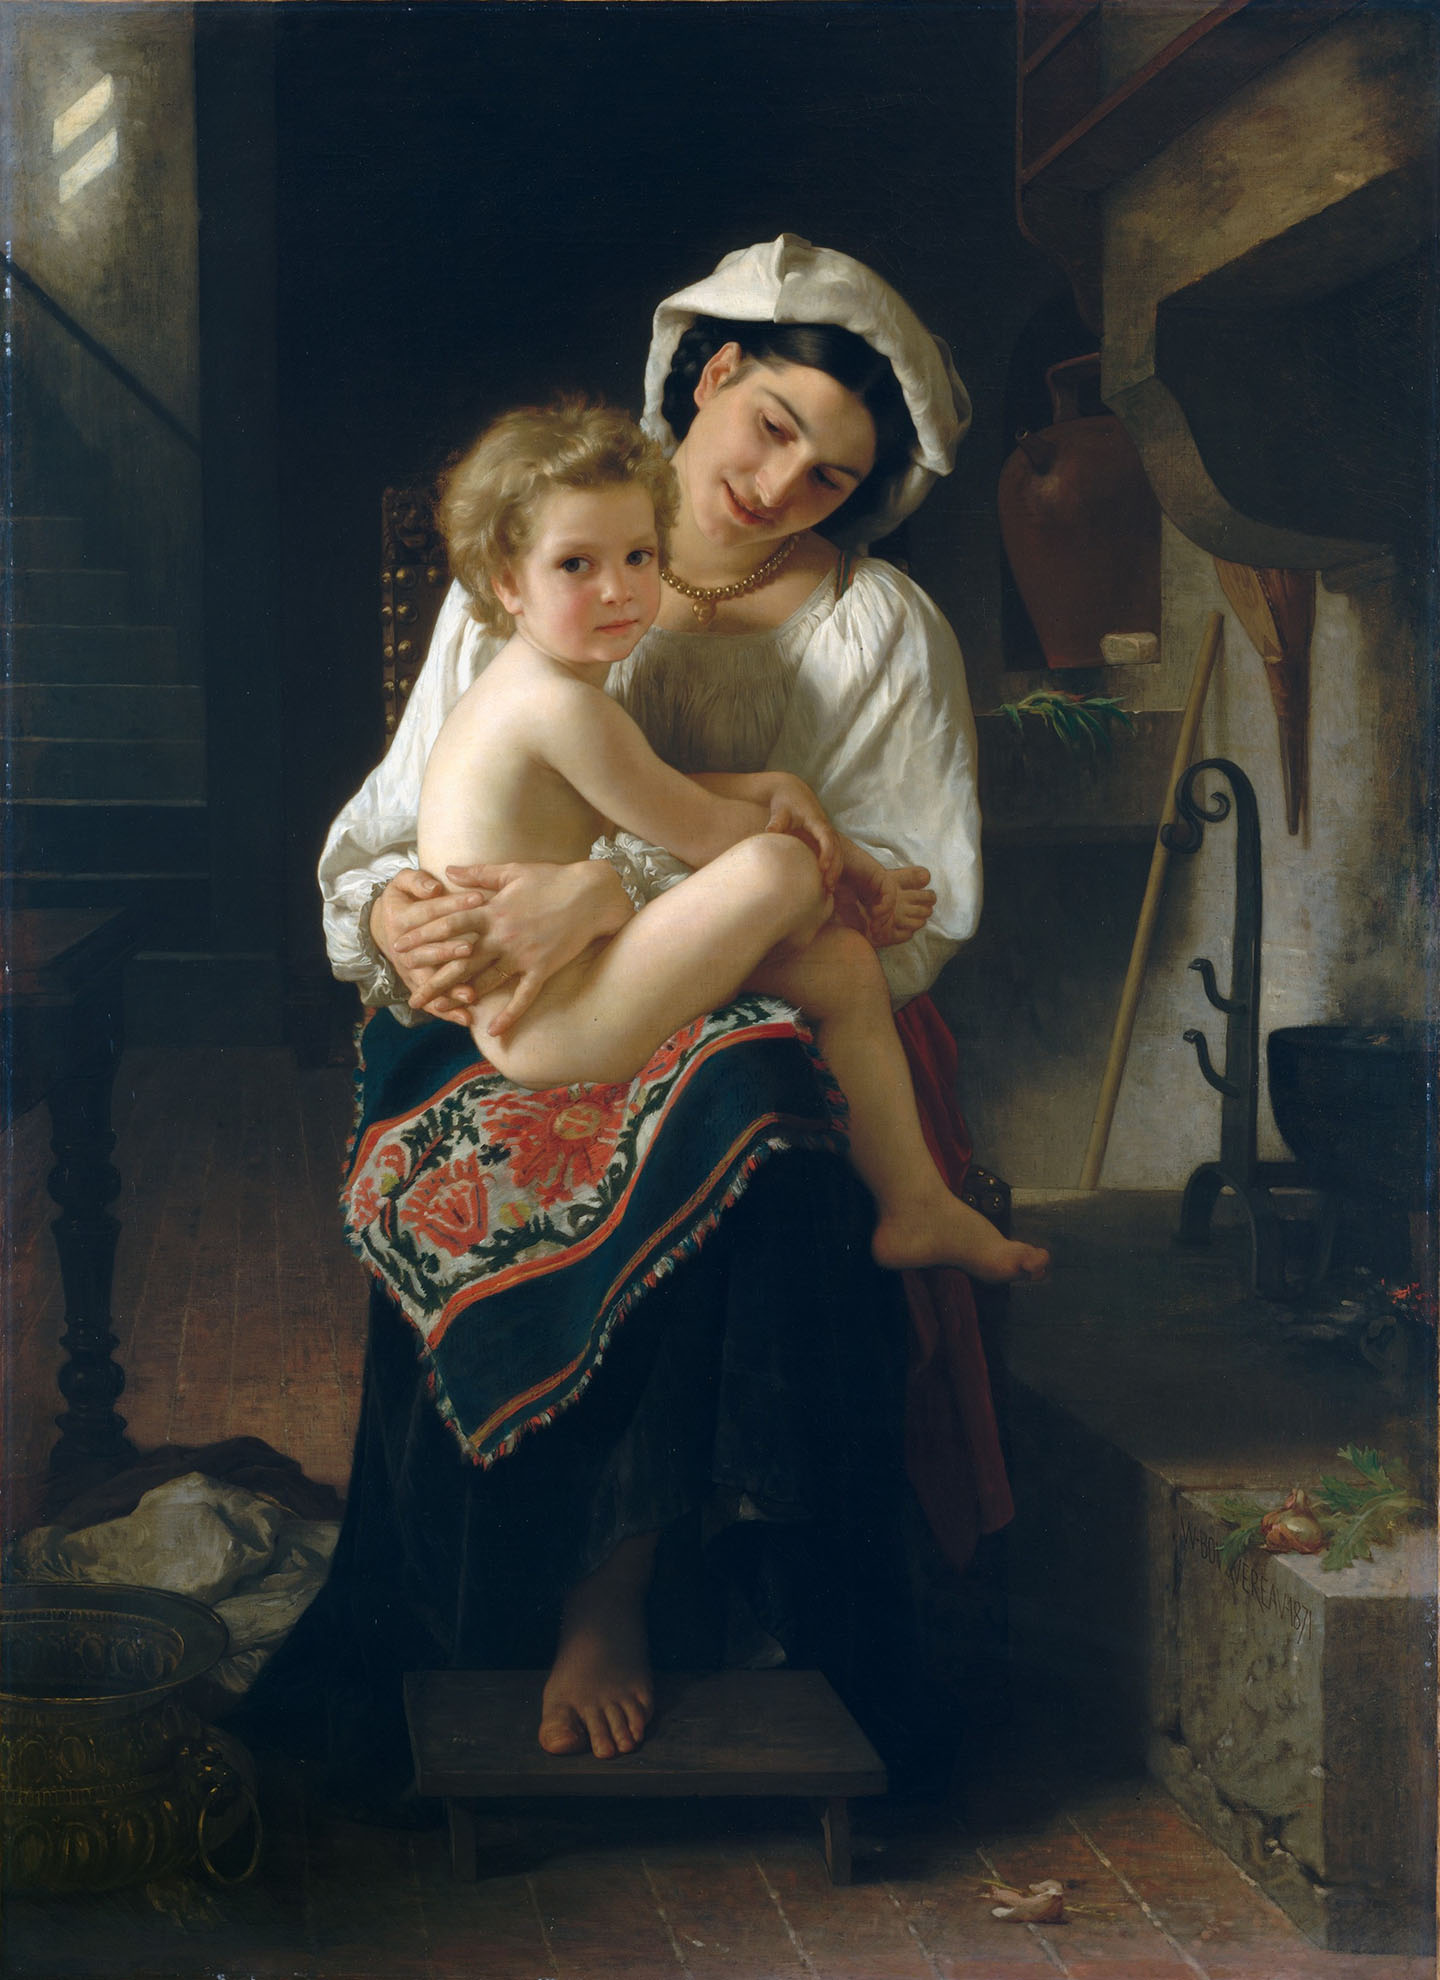 "Young Mother Gazing at Her Child," 1871, by William Adolphe Bouguereau.